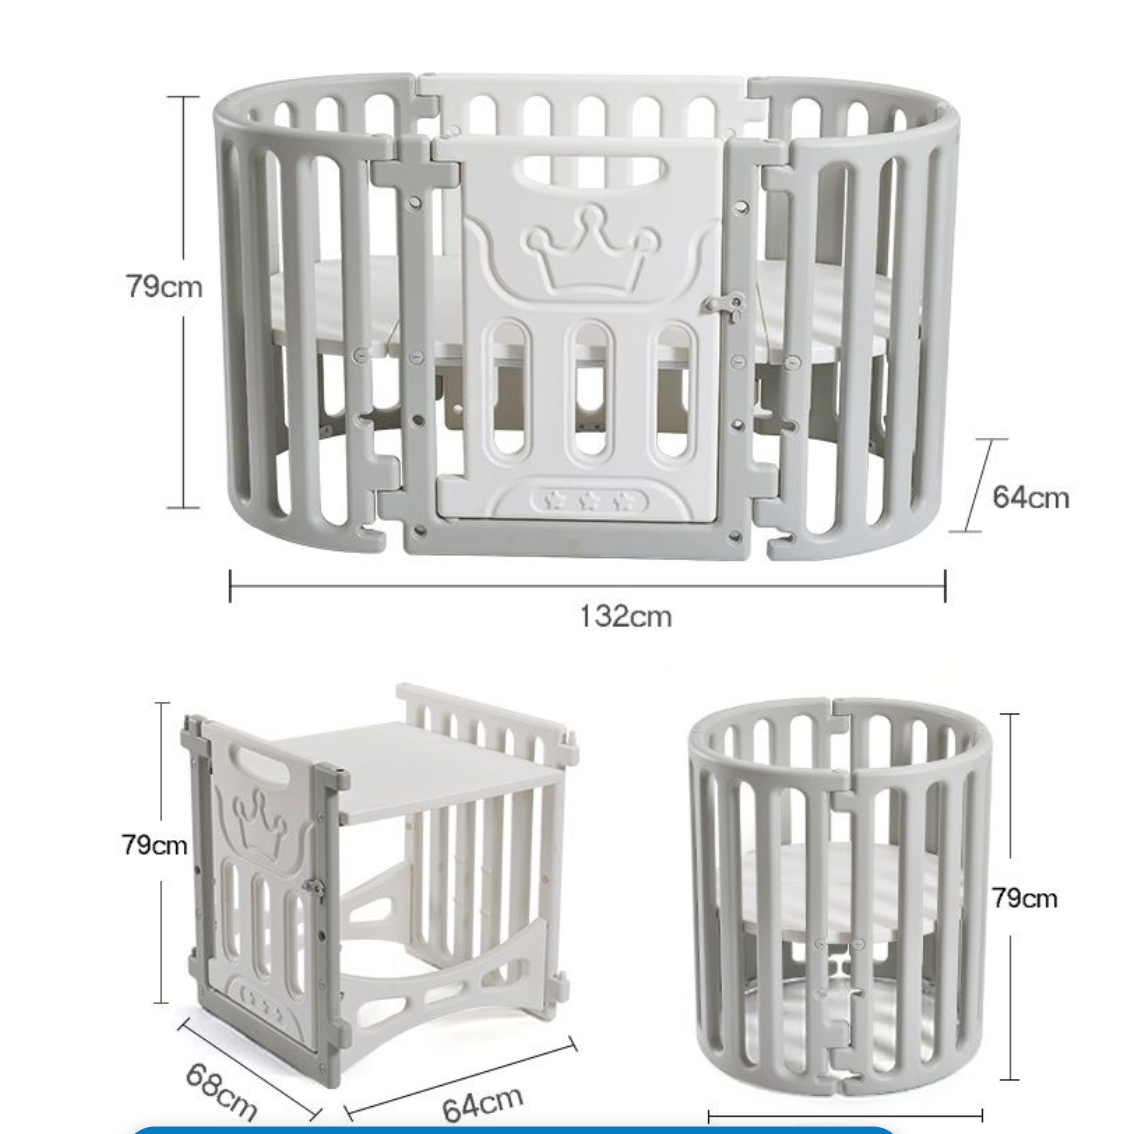 PVC Oval Cot, 9in1, Co-sleeper,Kids Bed, Play pen, Swing bed,Study table &Chairs -BRAND NEW